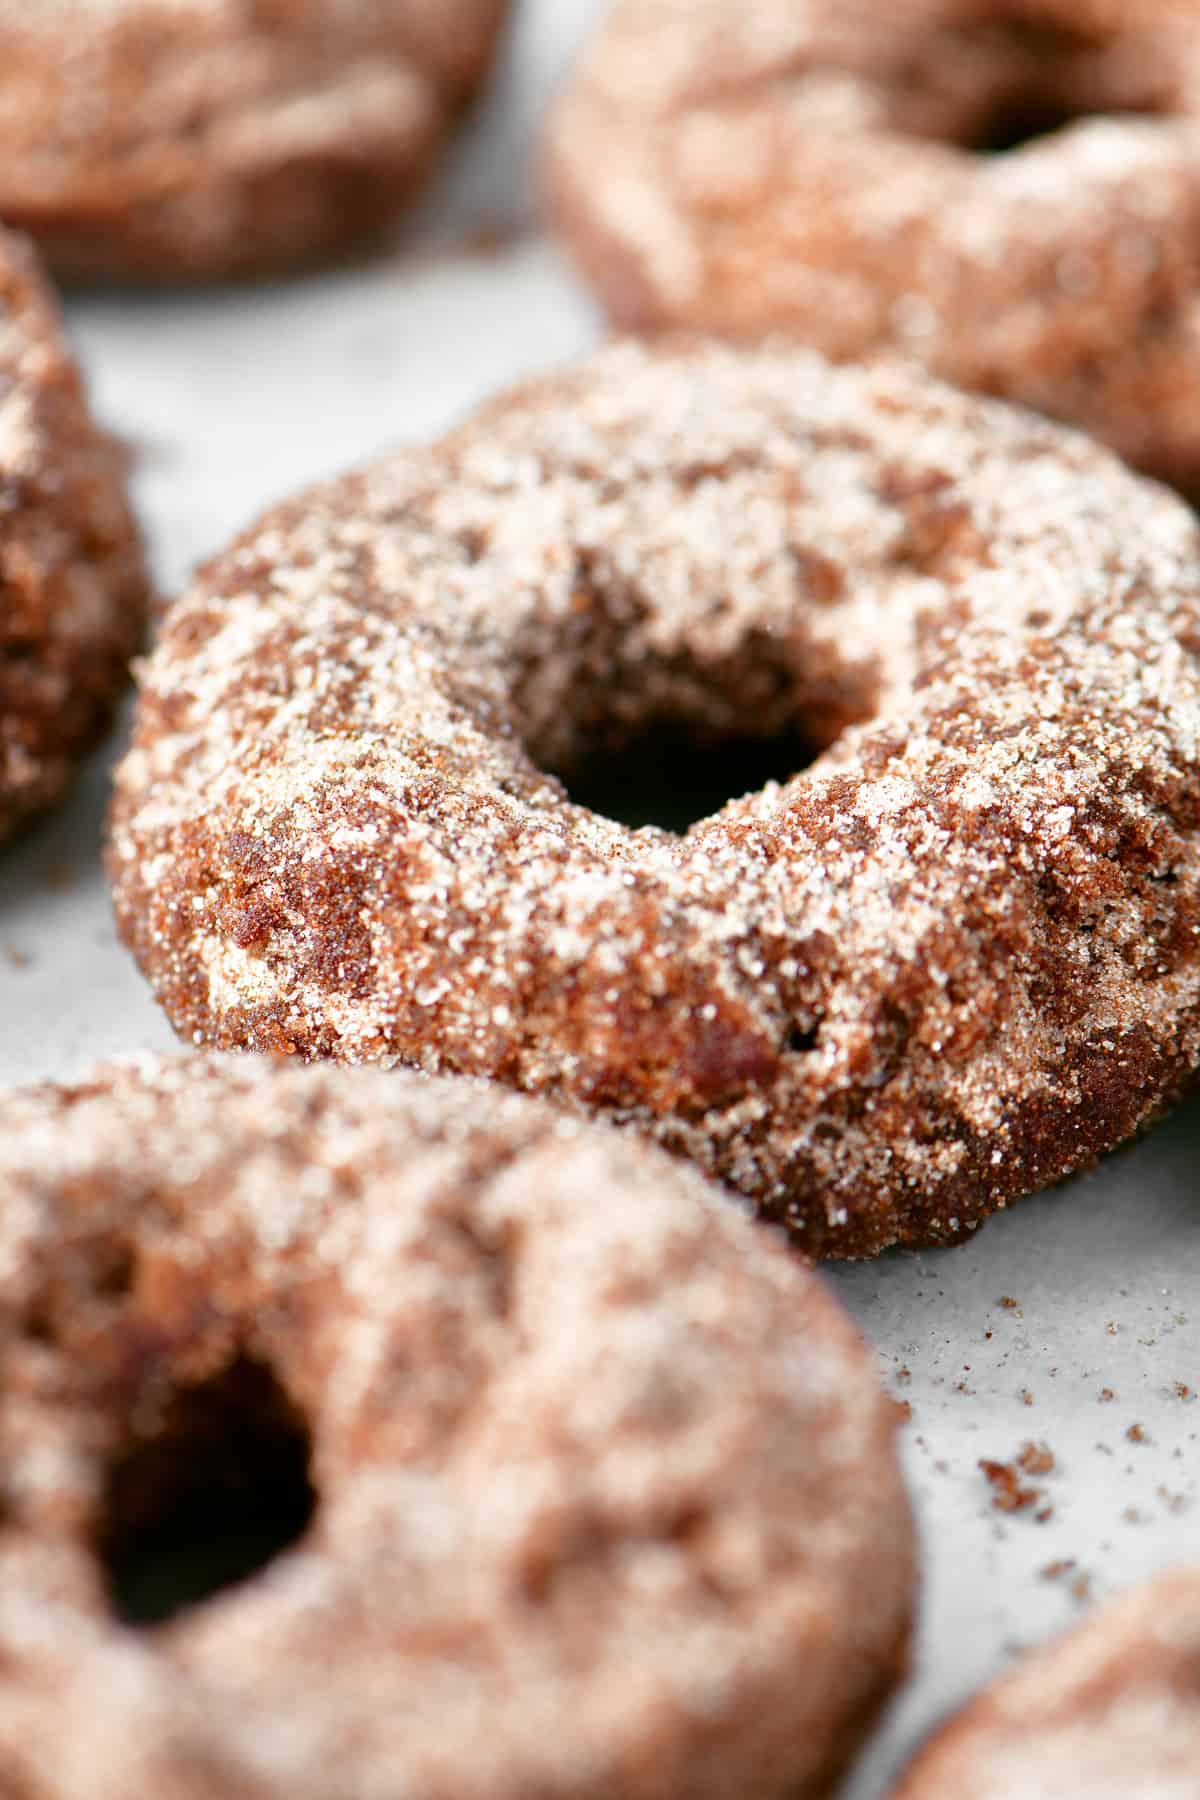 a close up photo of apple cider donuts on a baking sheet